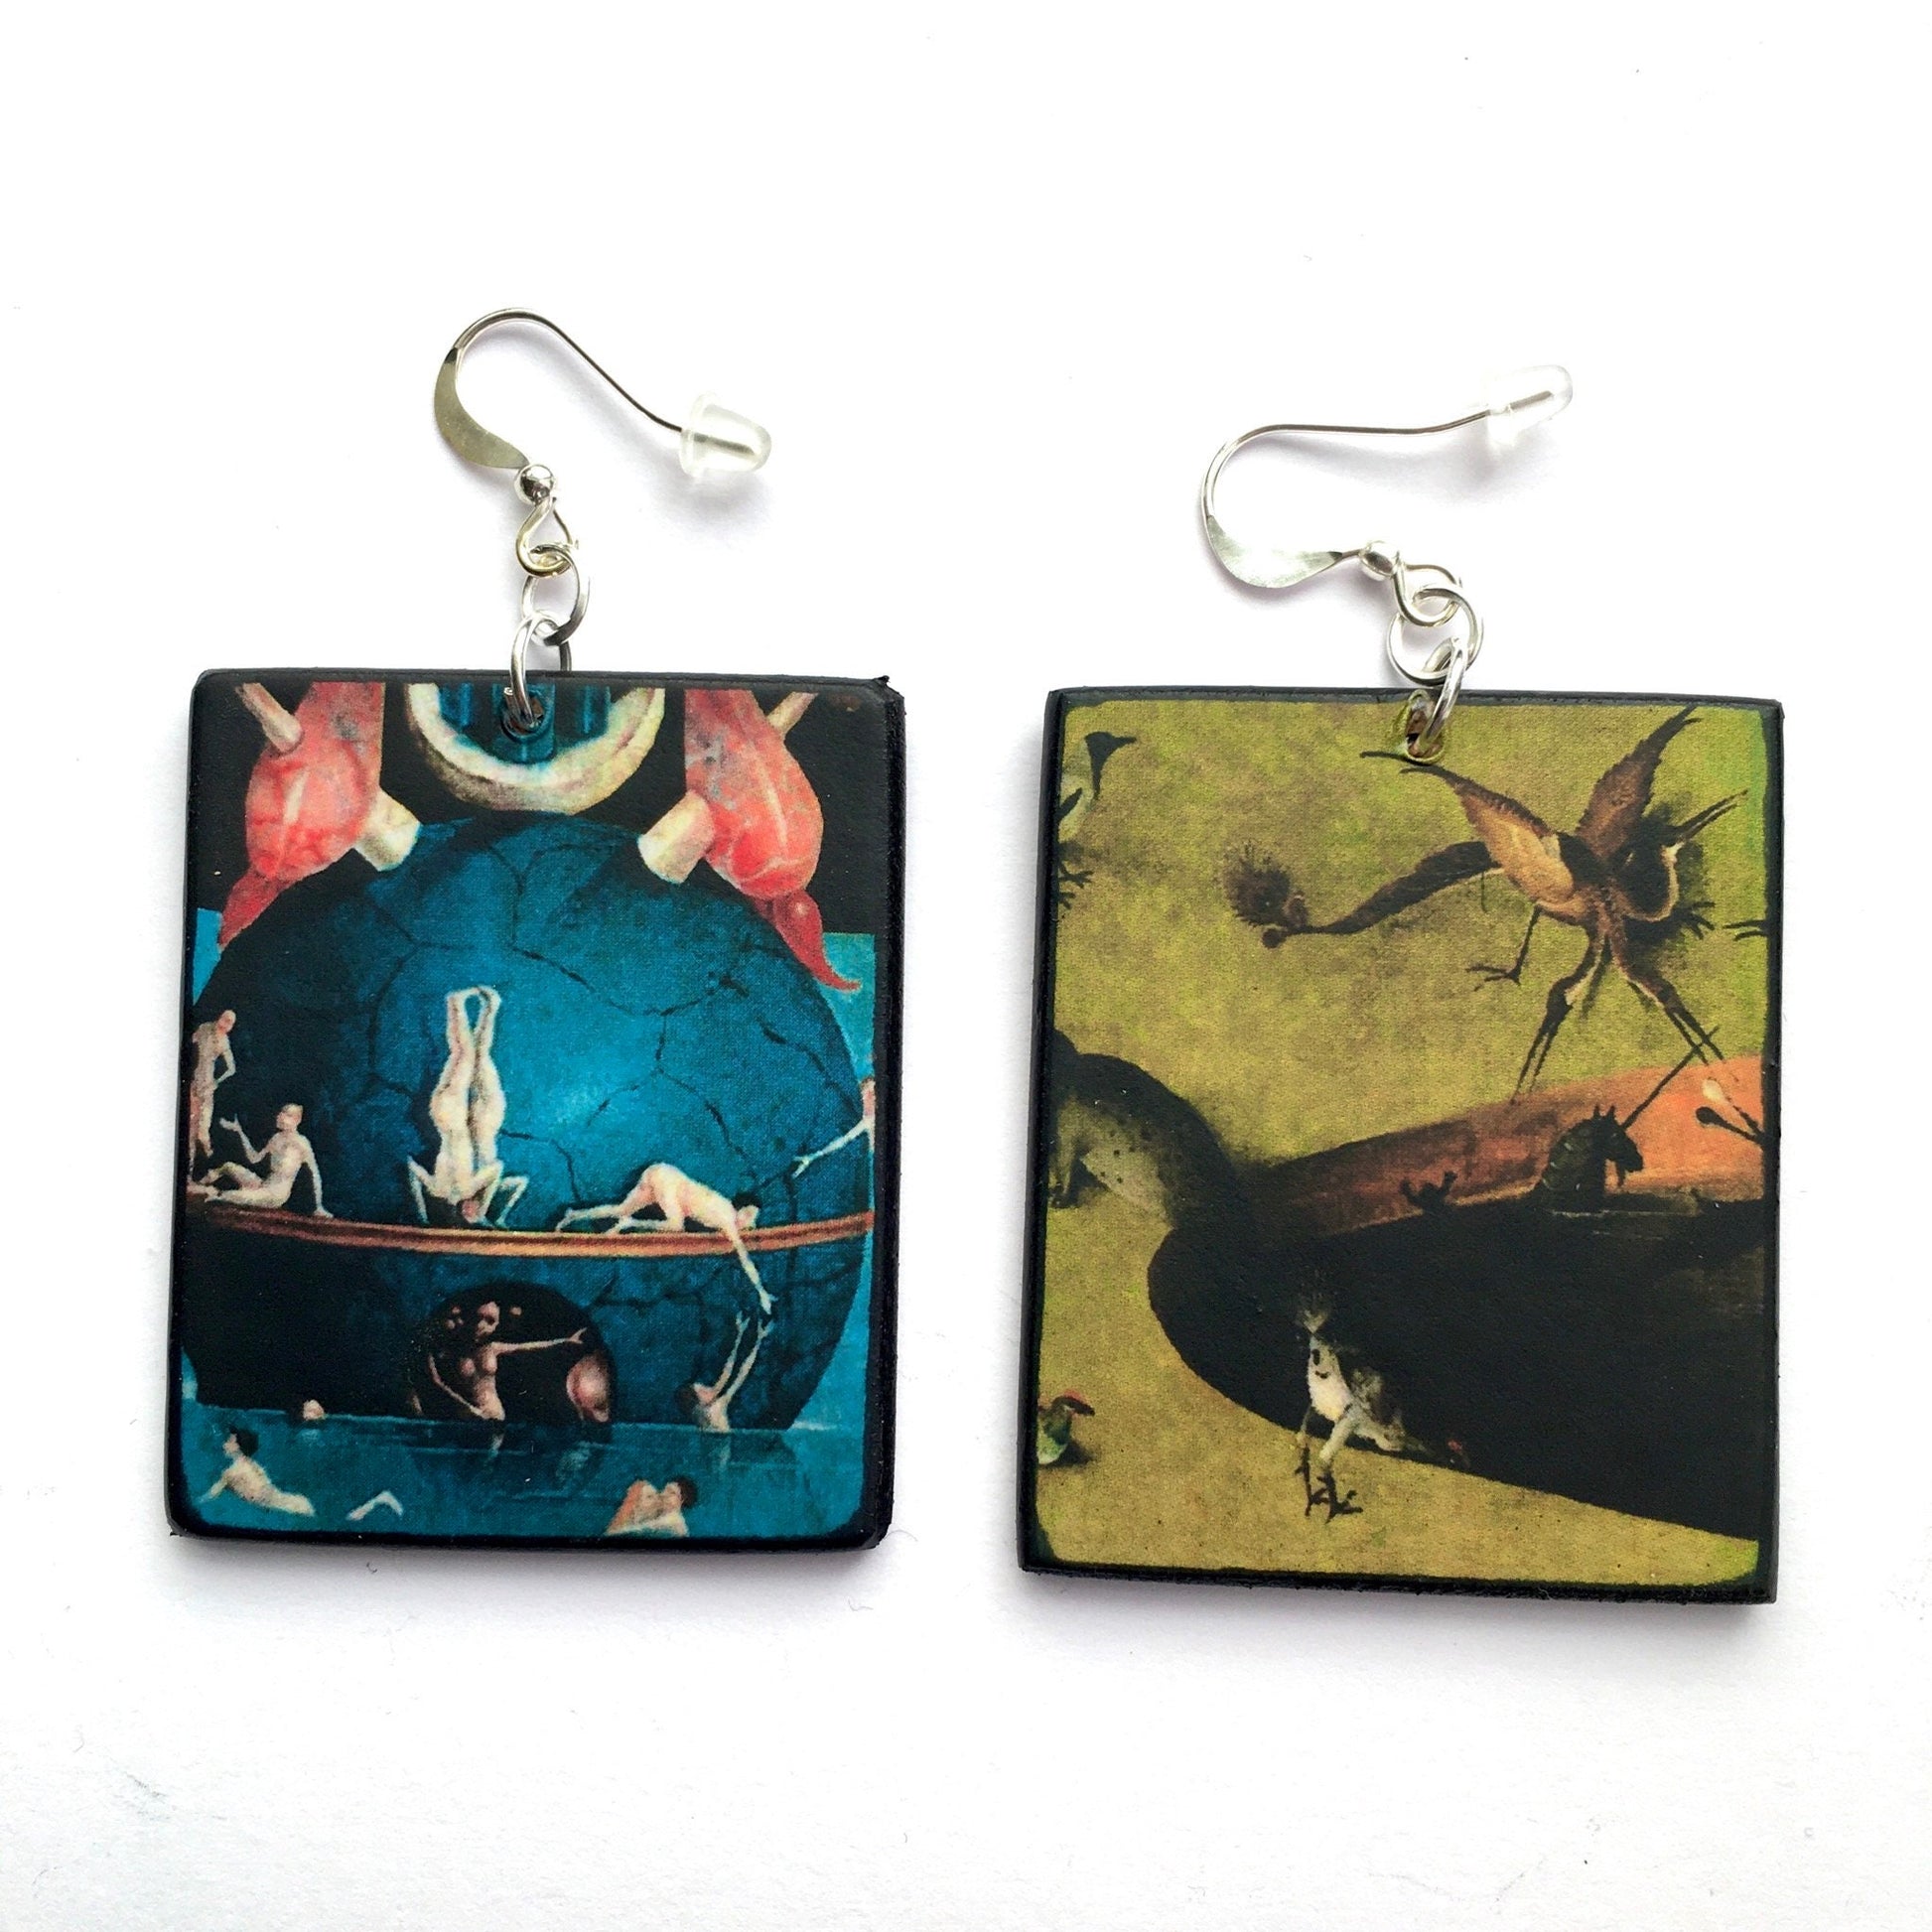 based on the oil painting The Garden of Earthly Delights Plated silver hooks and sustainable wood. OBLJEWELLERY has high quality jewellery very durable and light weight. 